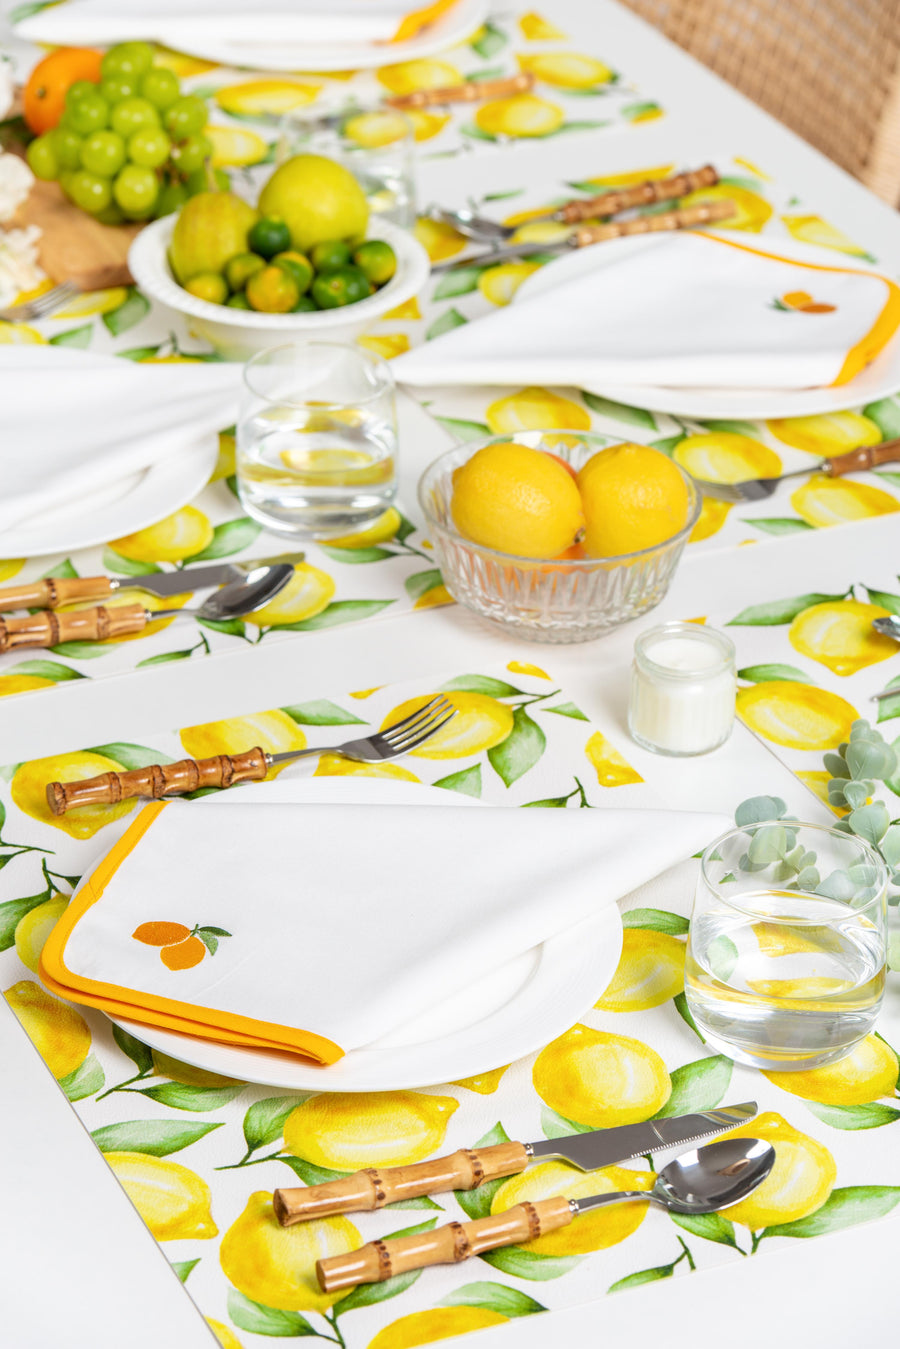 table placemats